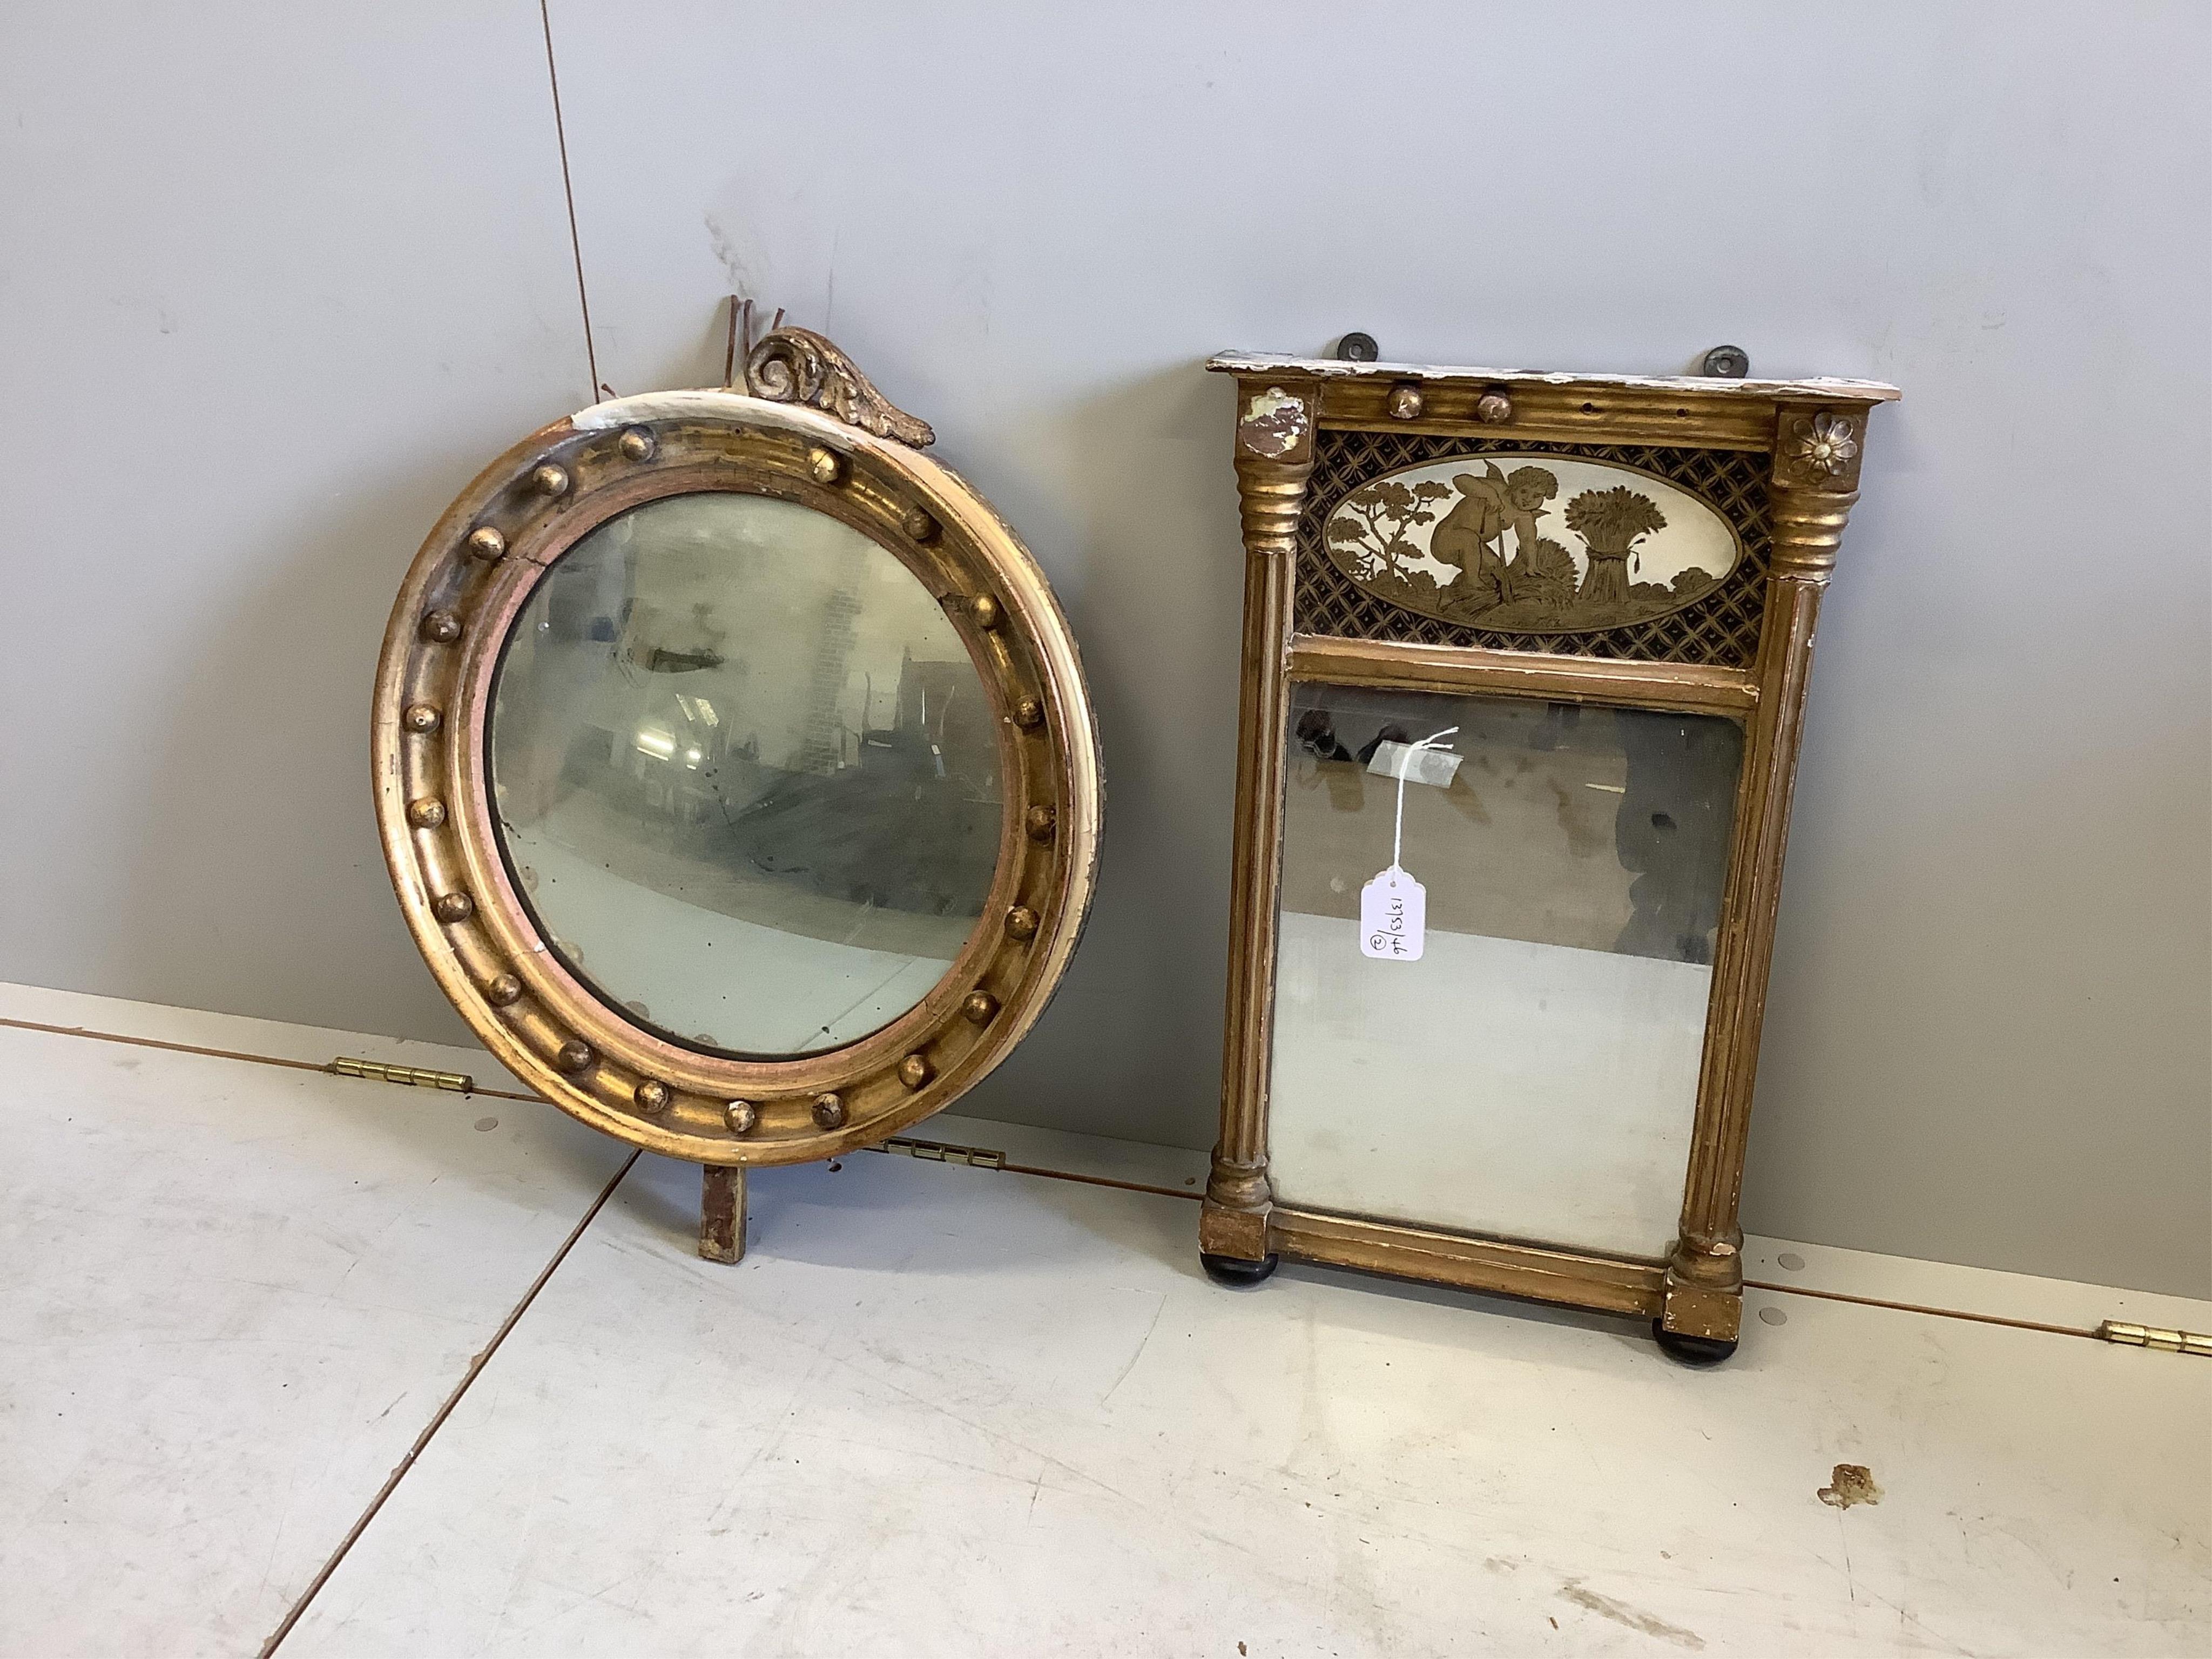 A Regency giltwood pier mirror, inset verre eglomise panel depicting 'Harvest', height 58cm together with a convex giltwood mirror, diameter 47cm, requiring restoration